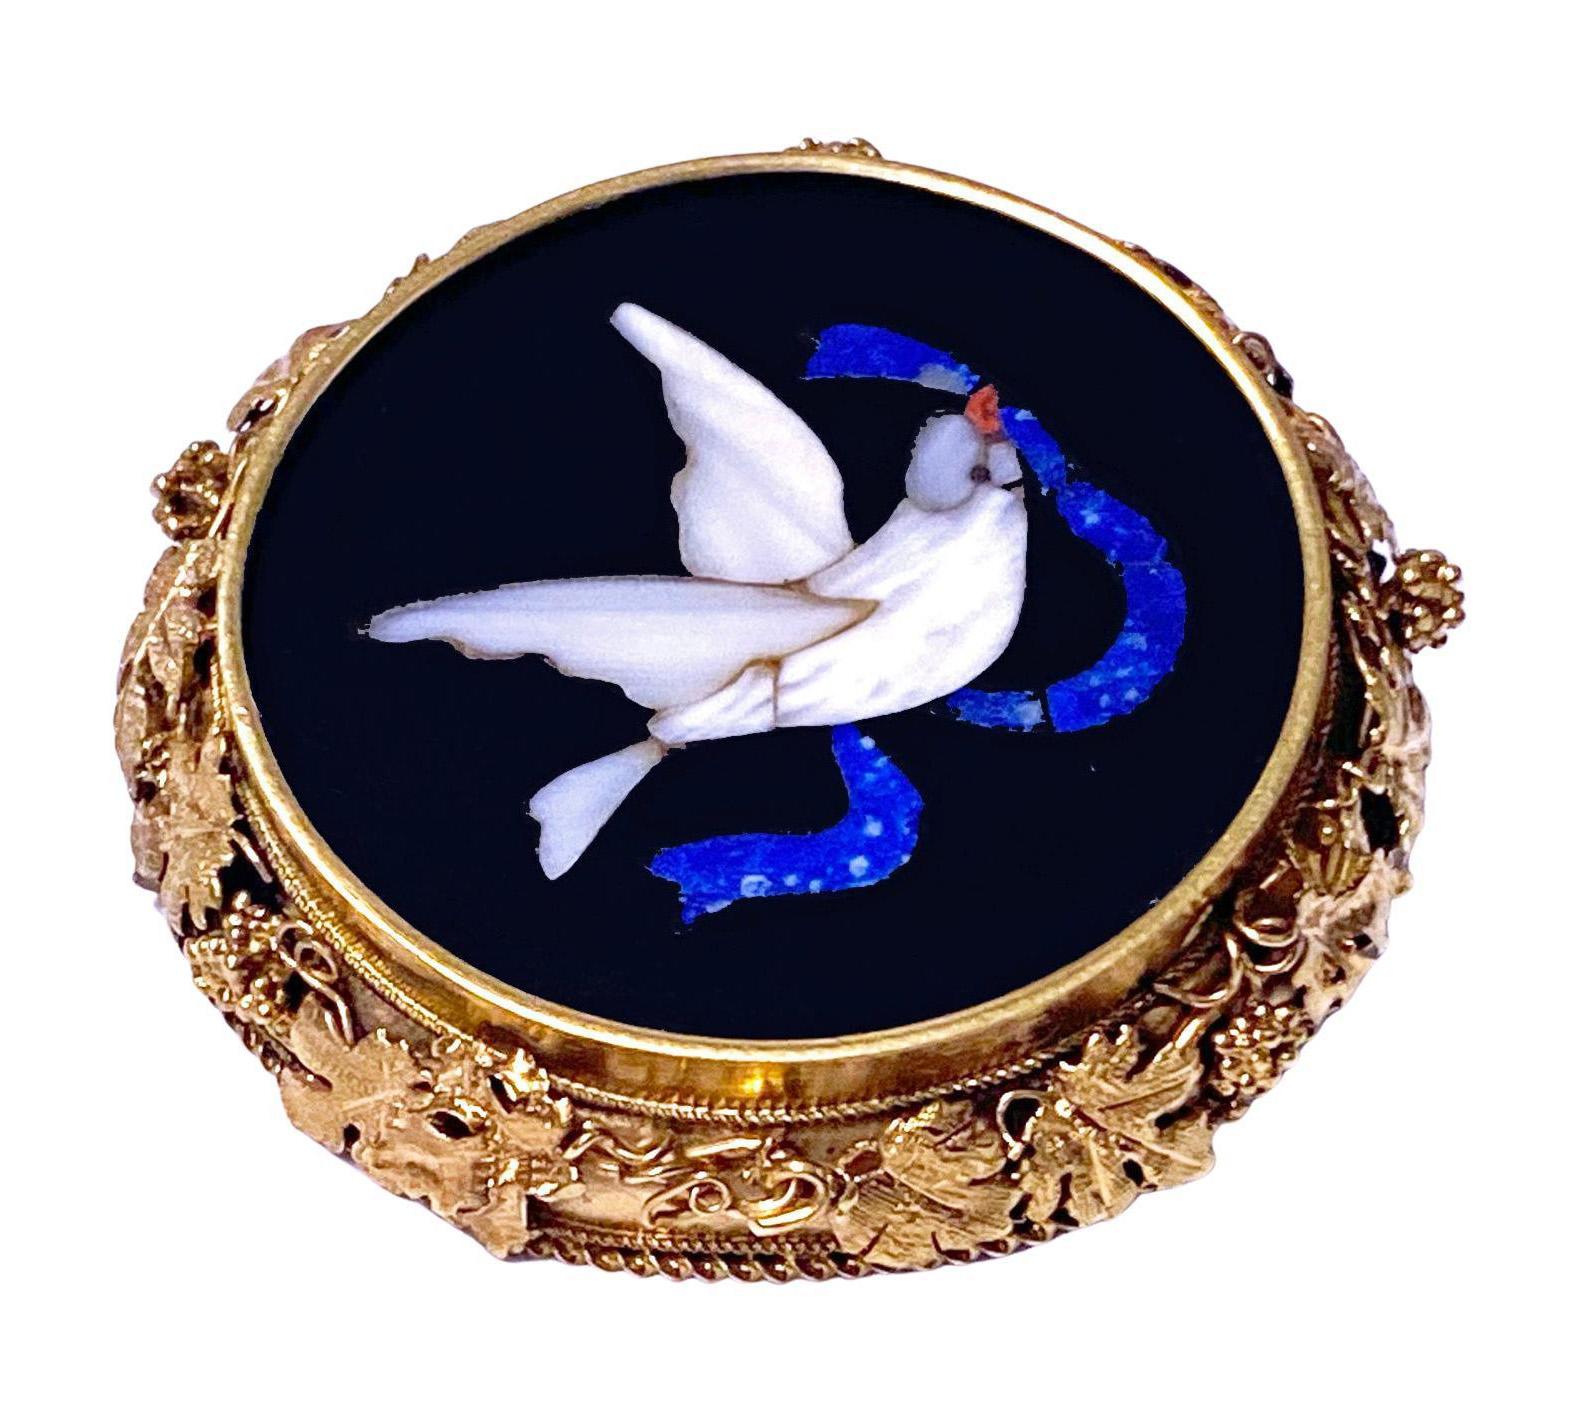 Antique 15K Gold Pietra Dura Pin, depicting a dove carrying a ribbon, mixed white, grey, blue and red on black onyx; frame with applied grape leaf motifs. Diameter: 3.50 cm . Item Weight: 9.44 grams.